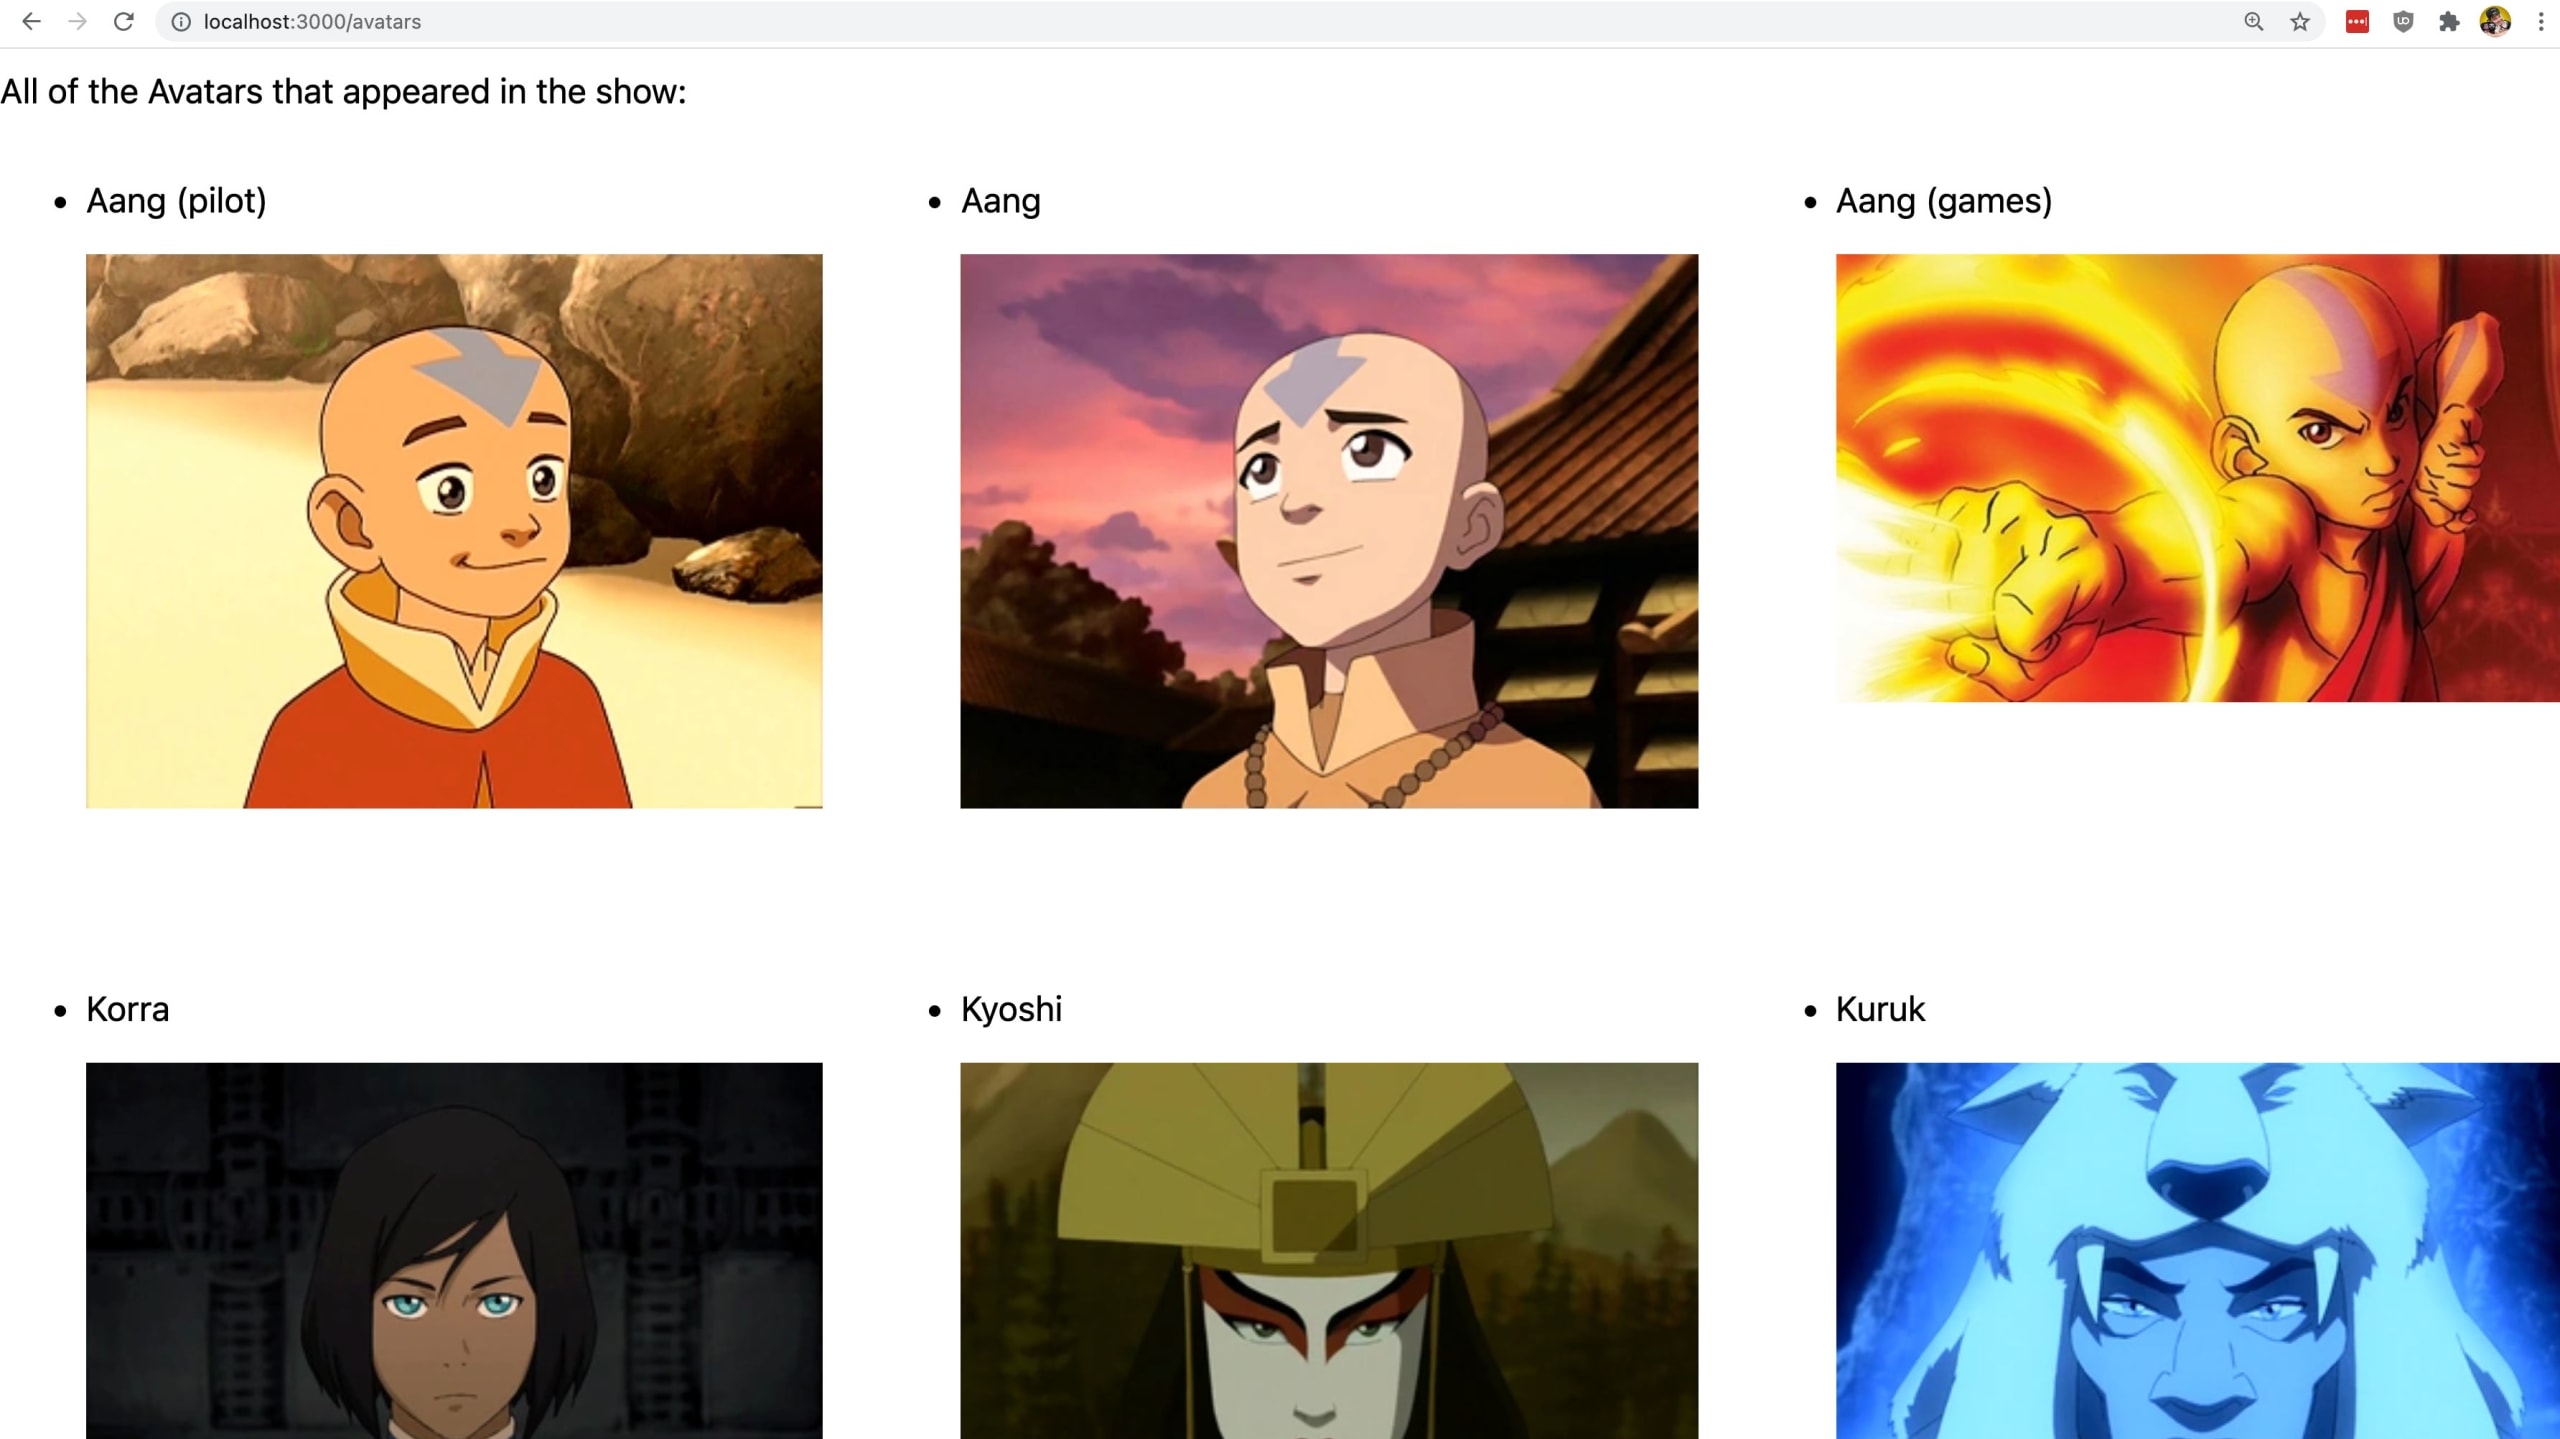 Grid of images showing all avatars